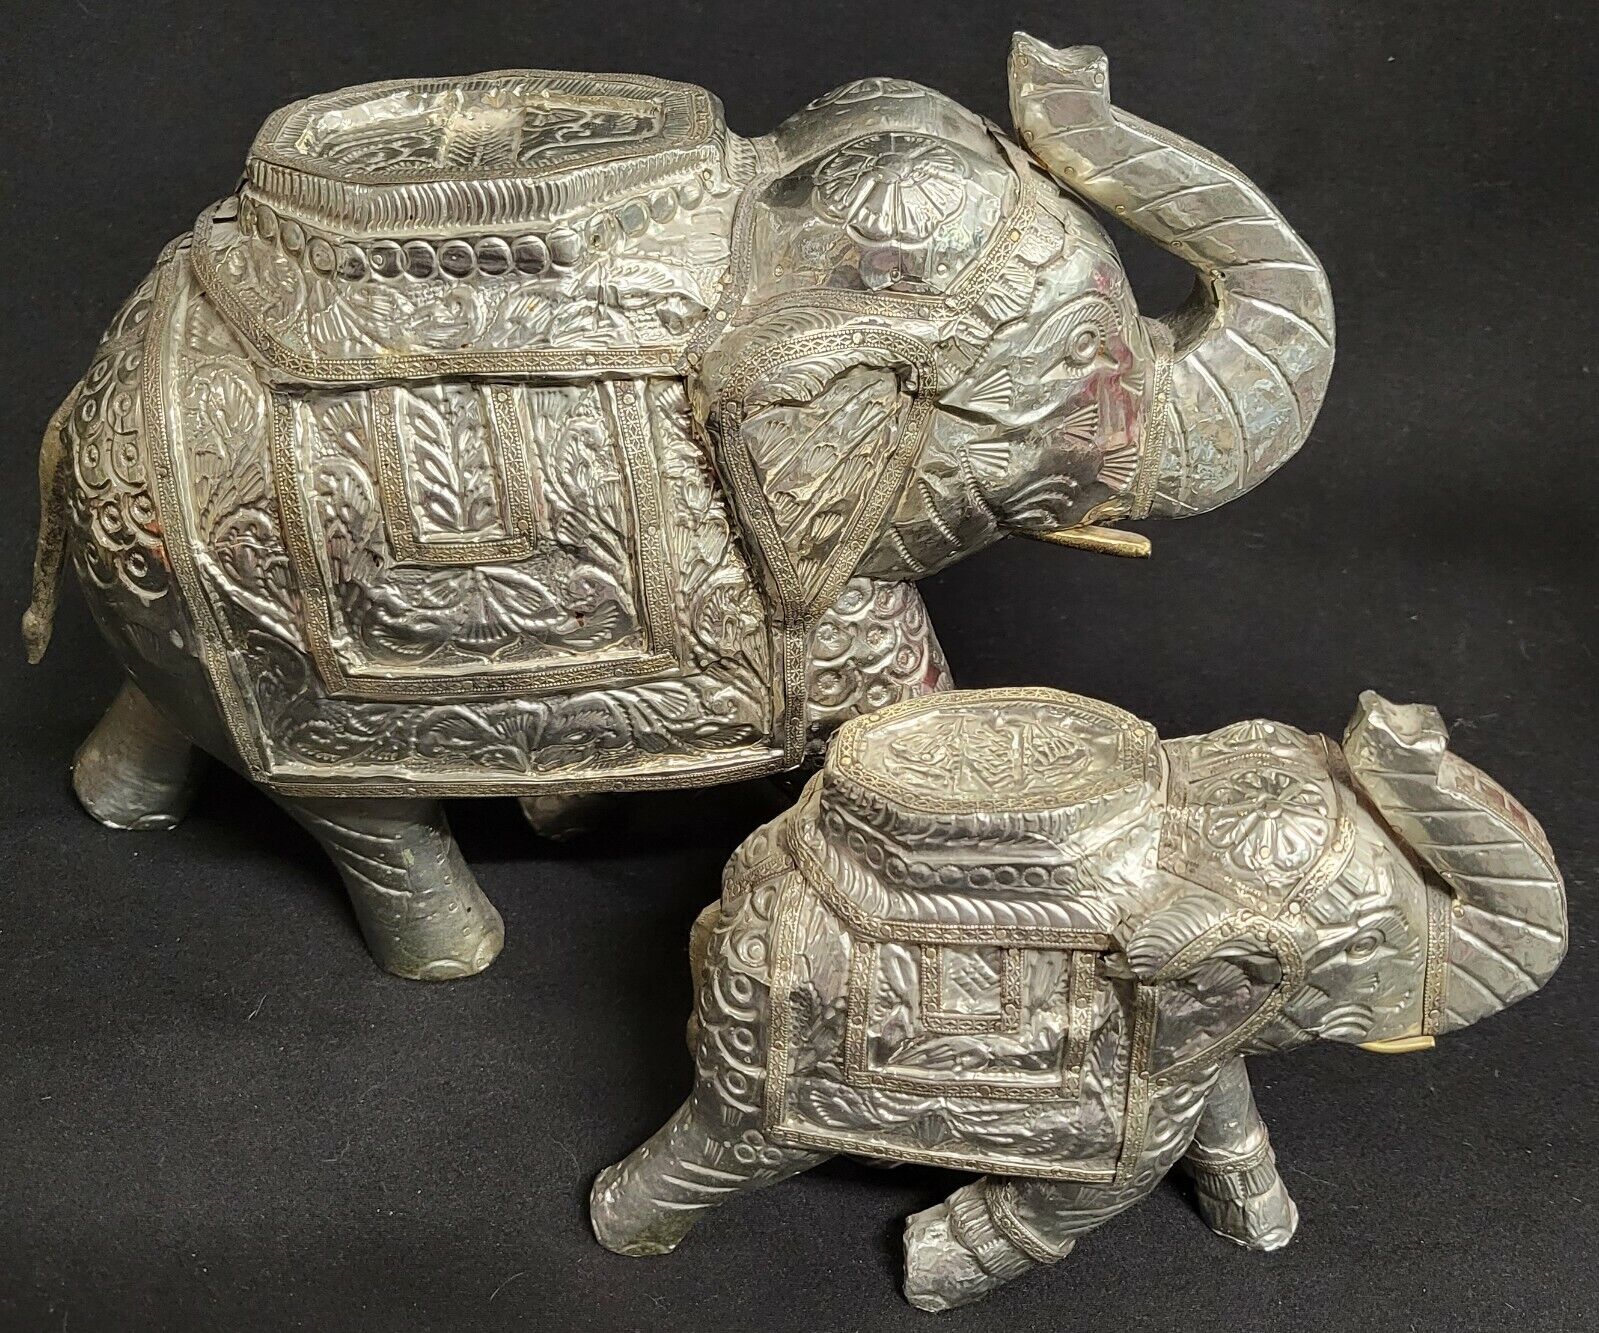 Large Hand Hammered Silver Elephants Set 2 Pachyderms Made in India Detailed